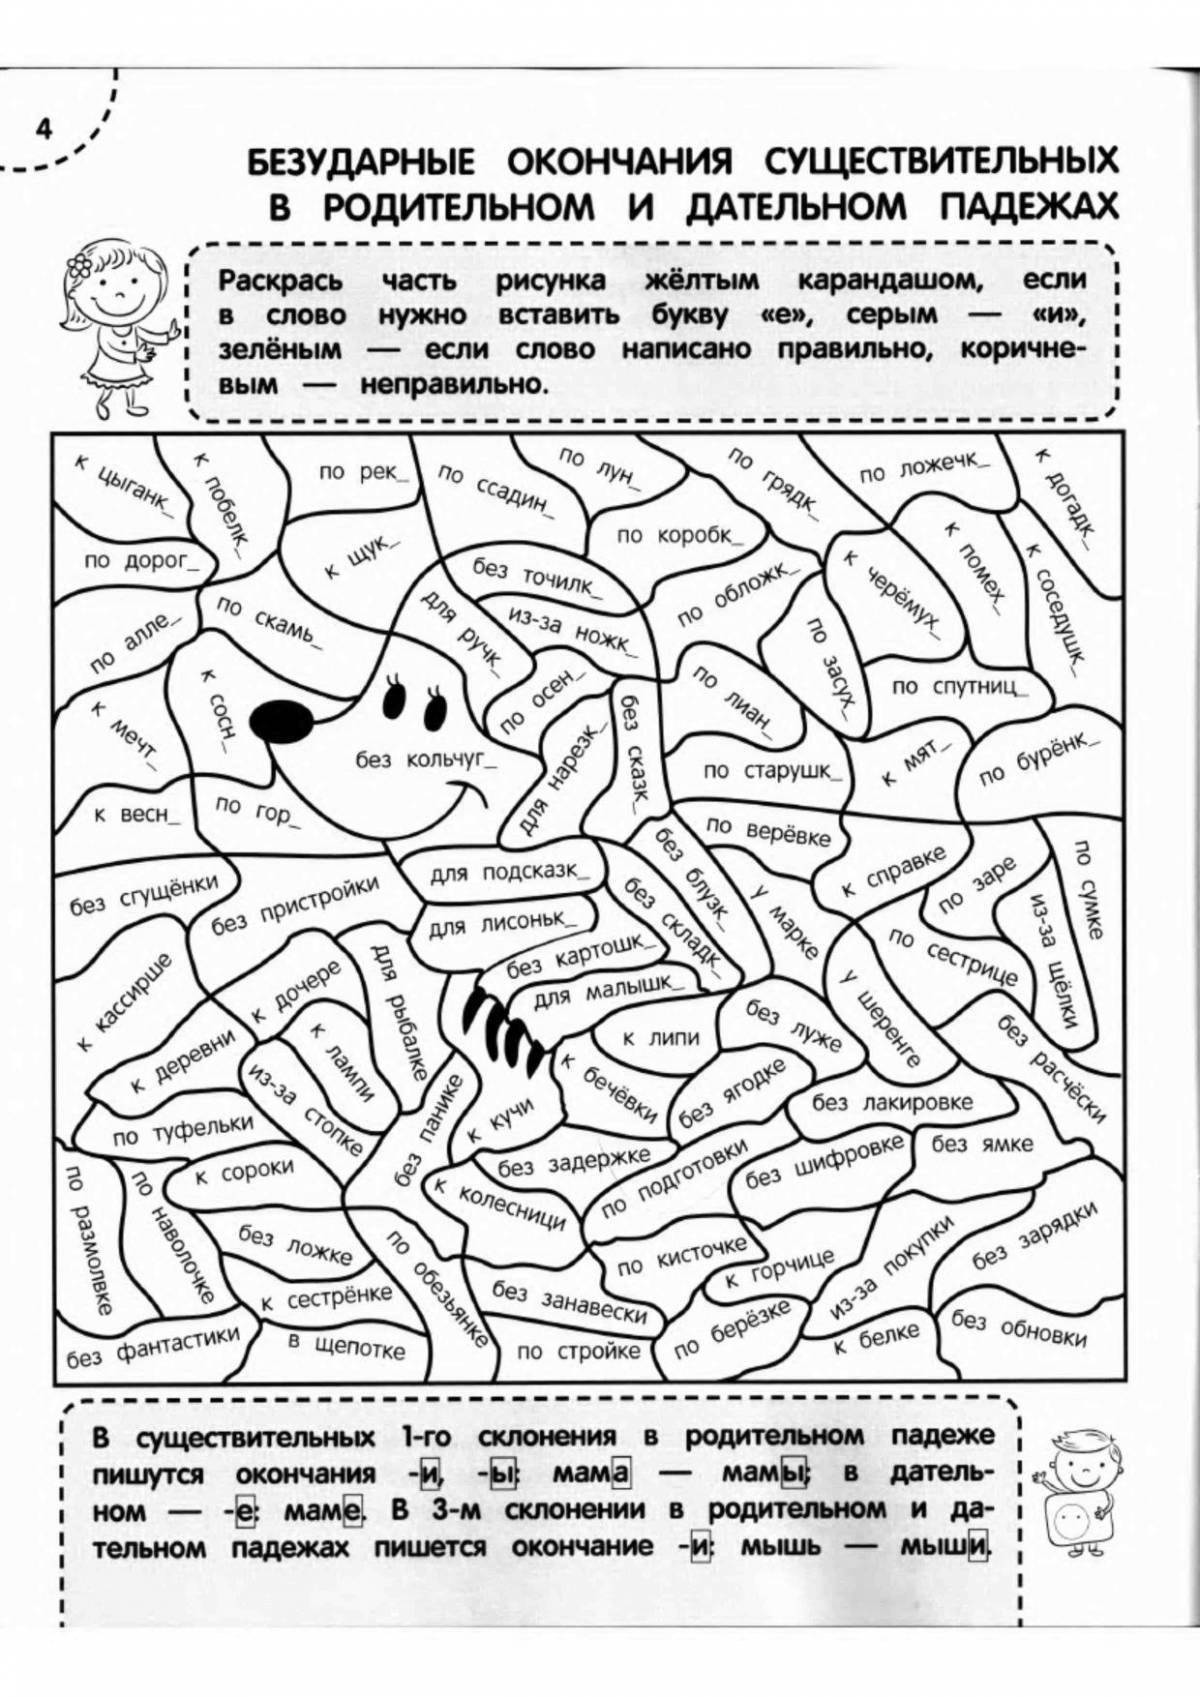 Attractive coloring write a simulator without errors Grade 3 answers